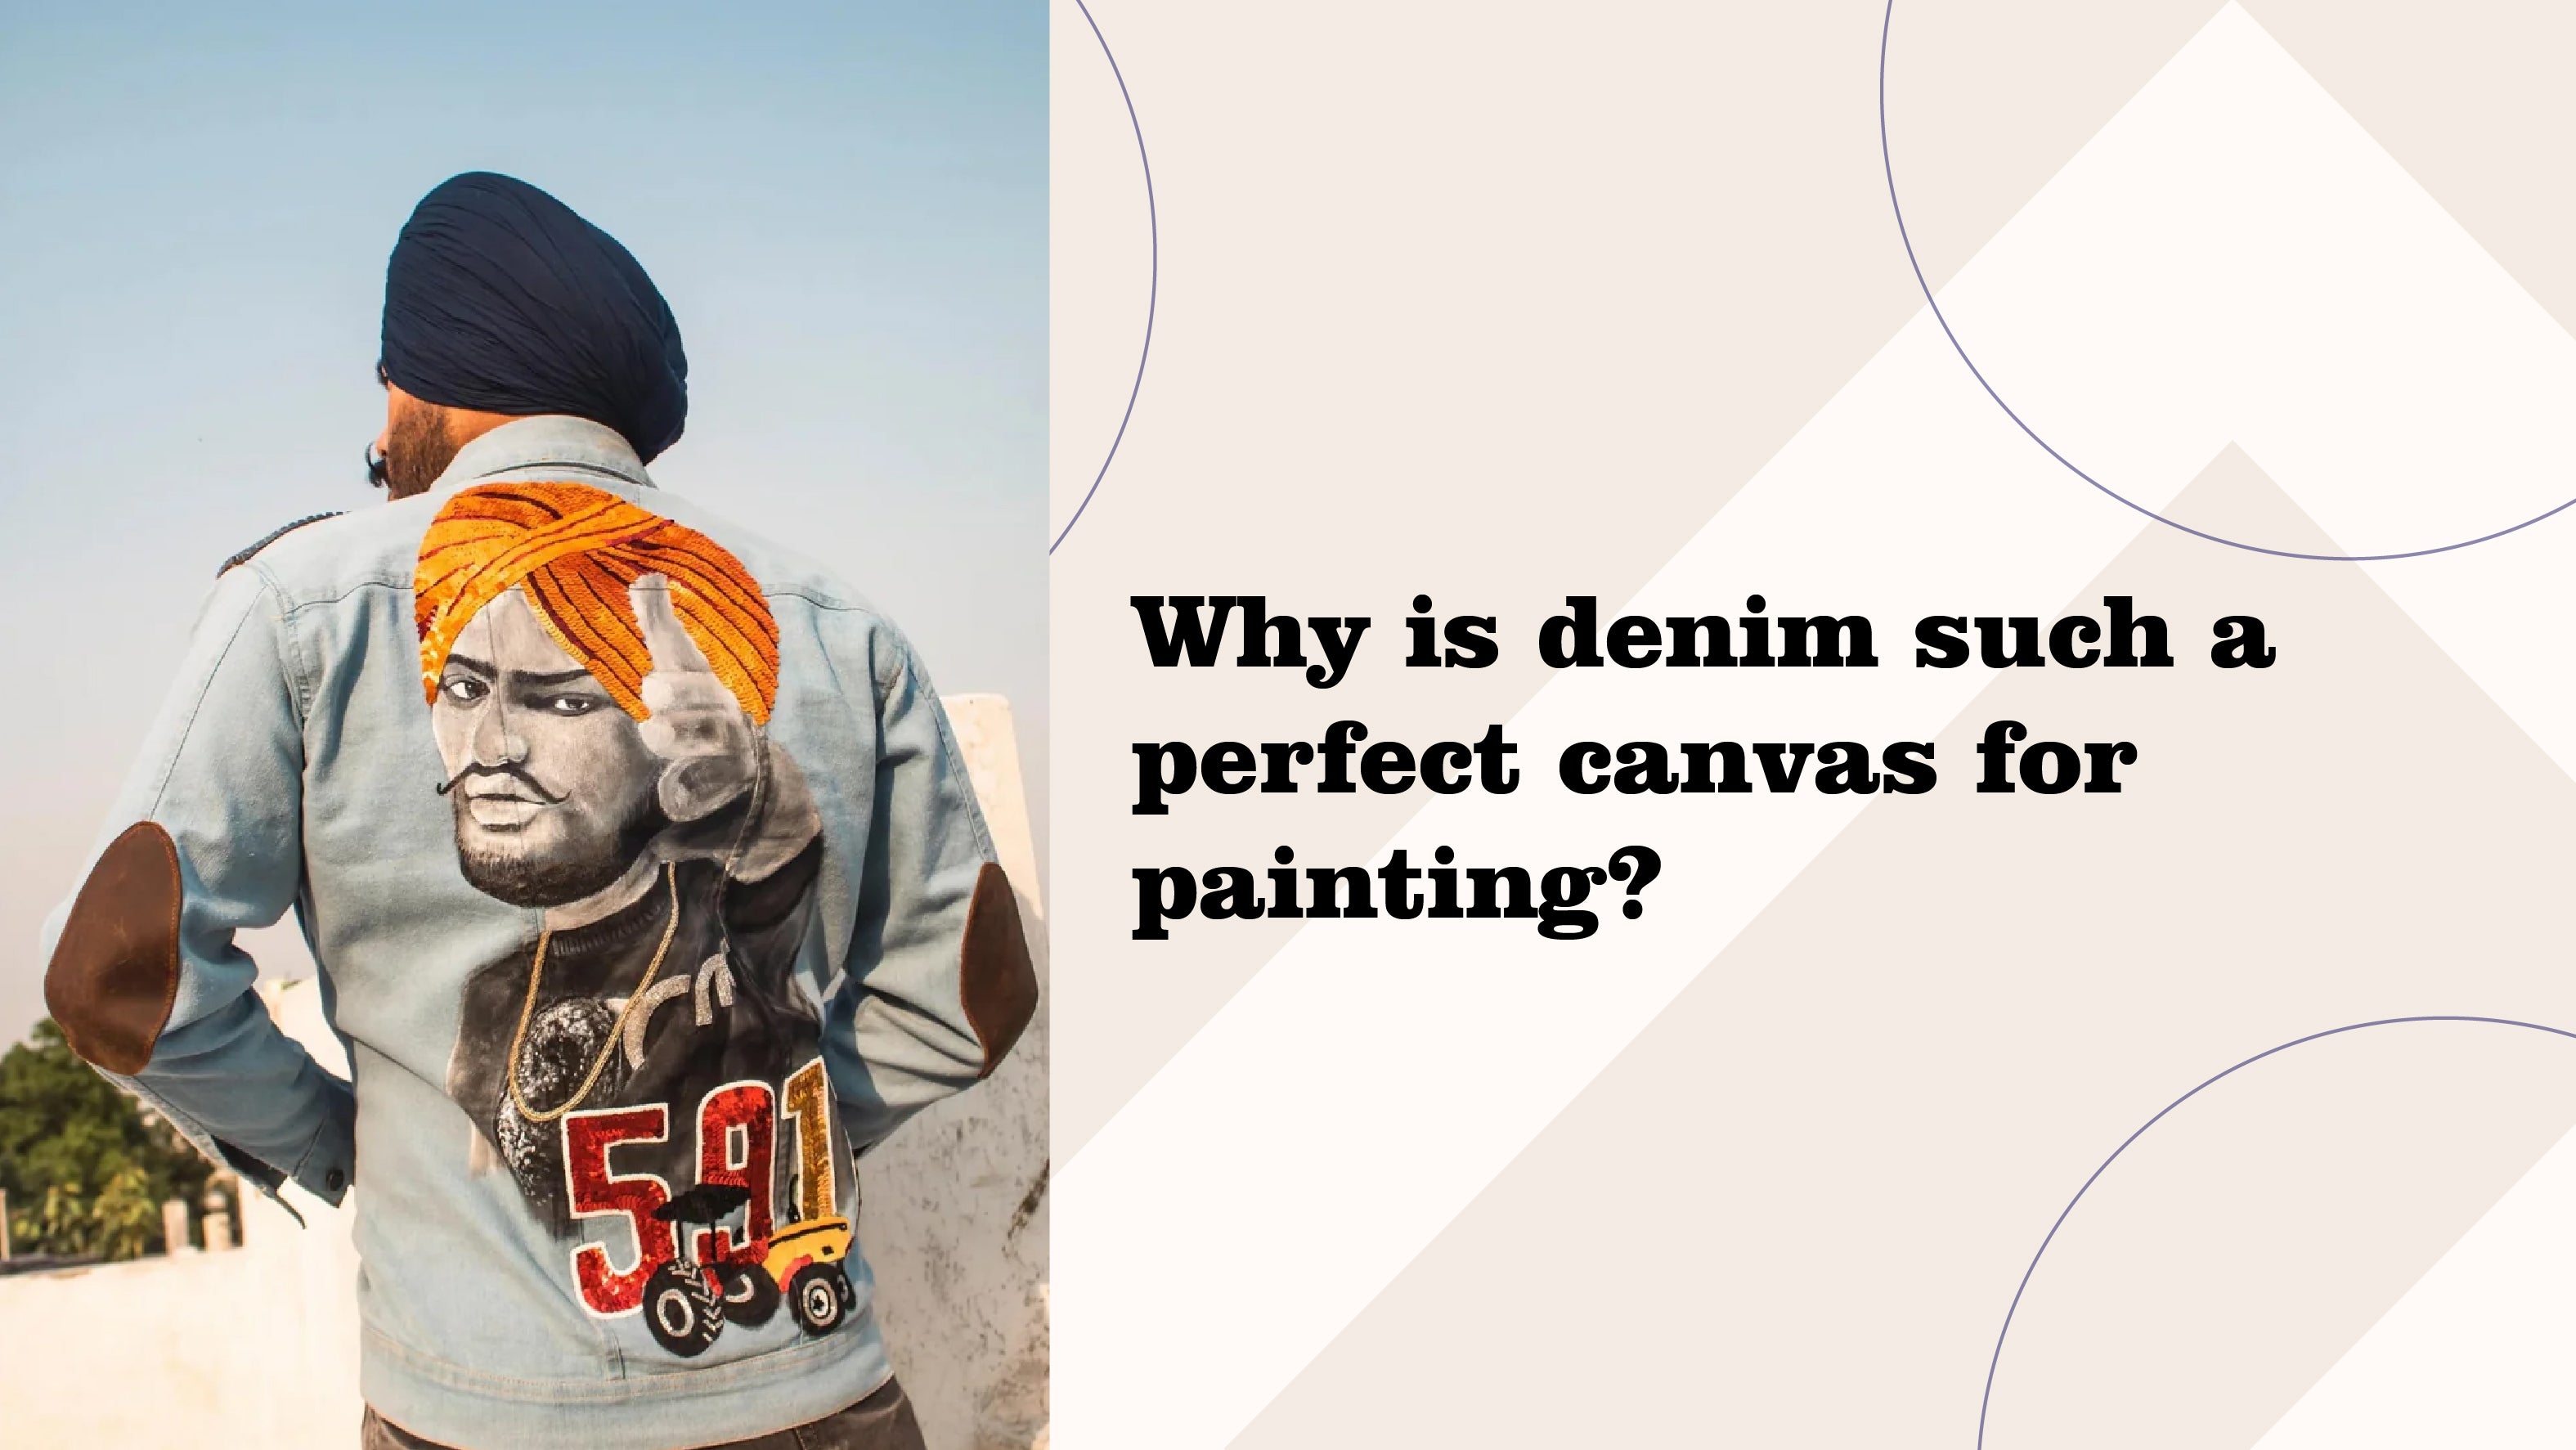 WHY IS DENIM SUCH A PERFECT CANVAS FOR PAINTING?